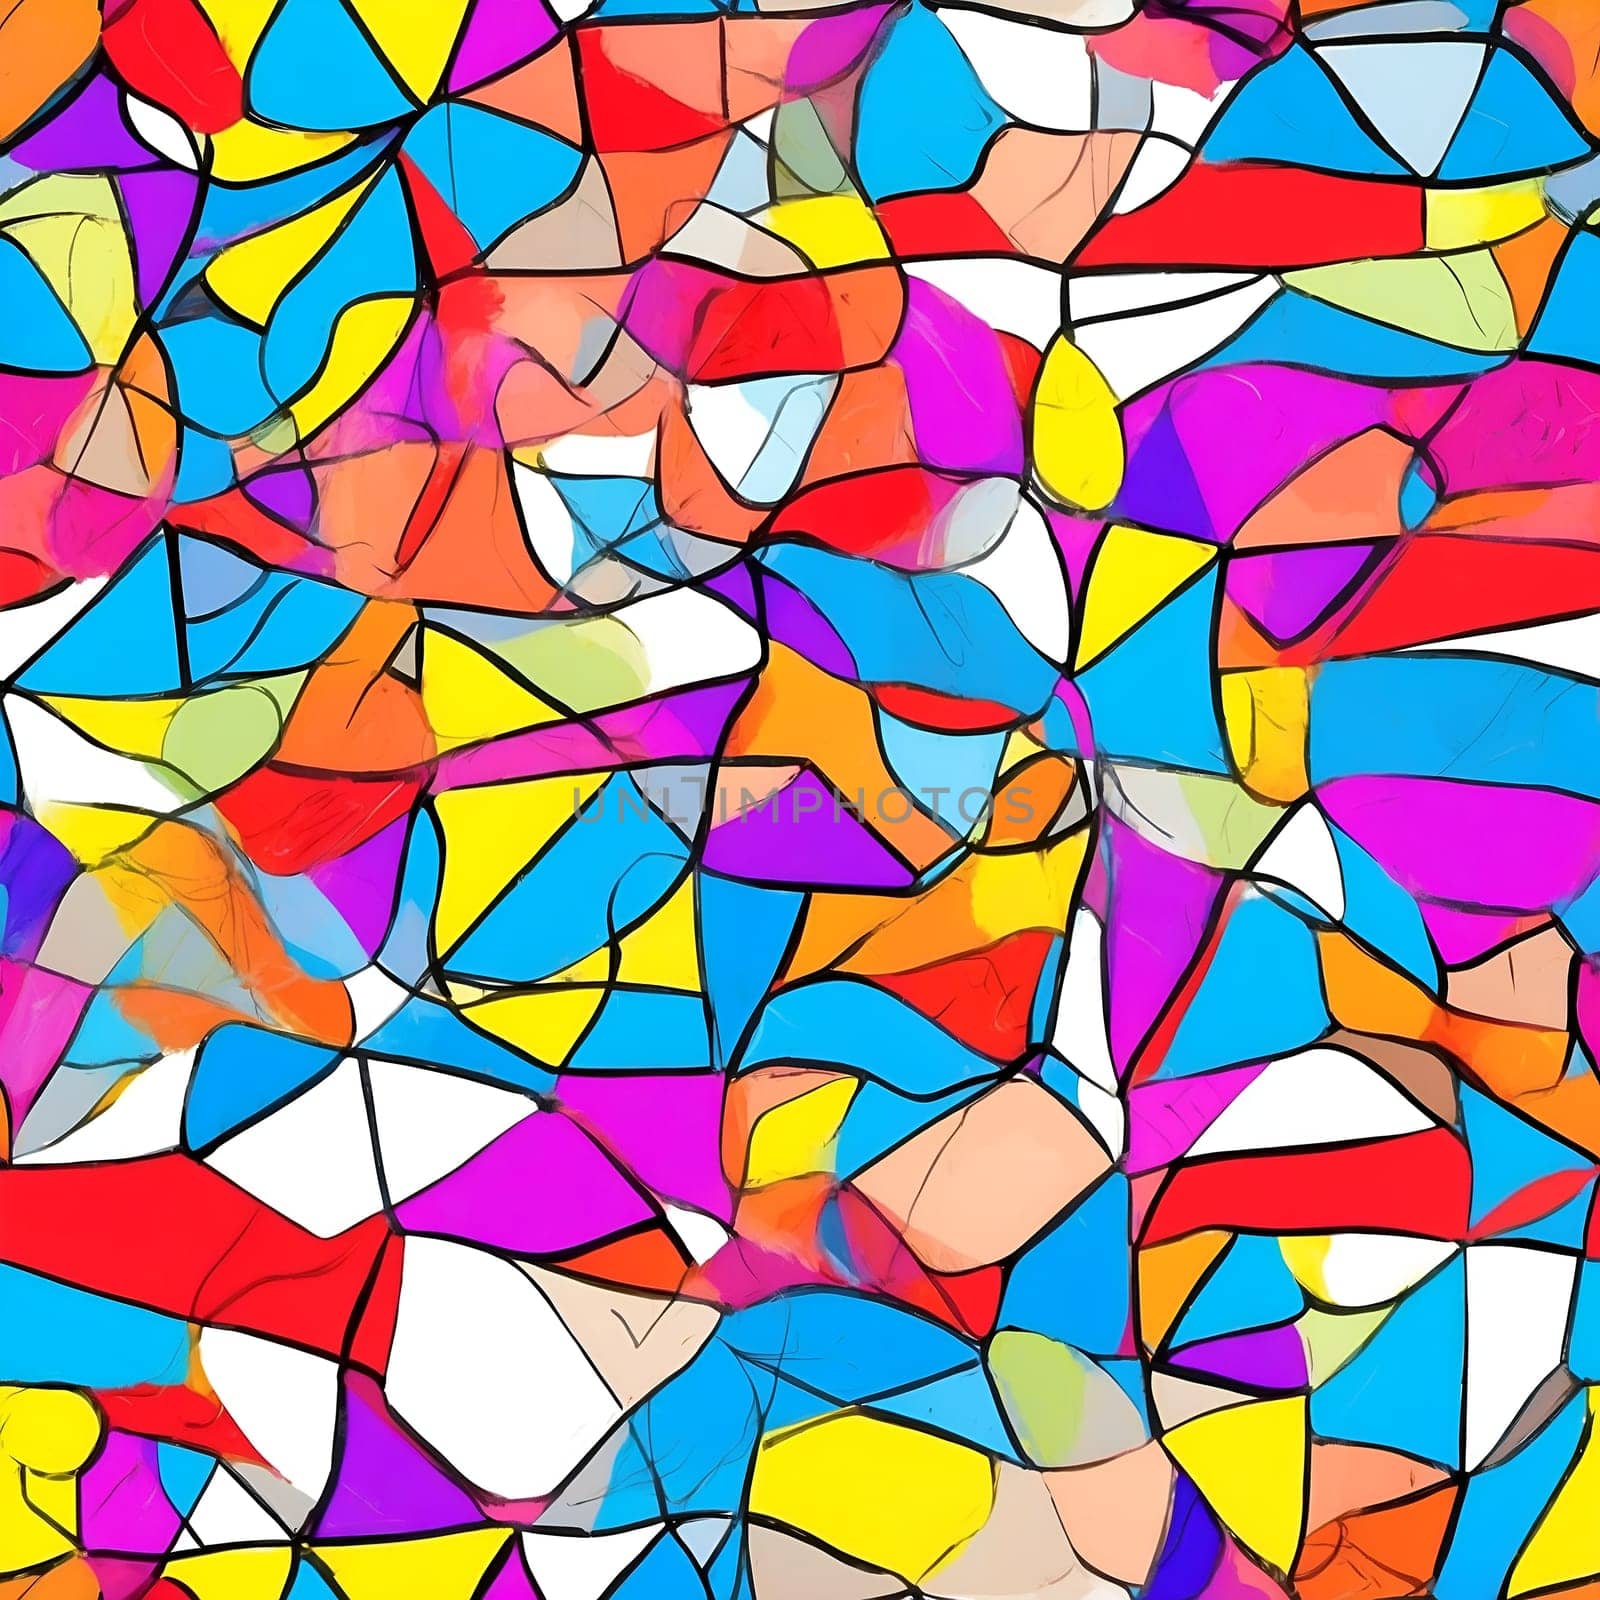 A seamless pattern featuring a multitude of different colored shapes in a lively and dynamic composition.